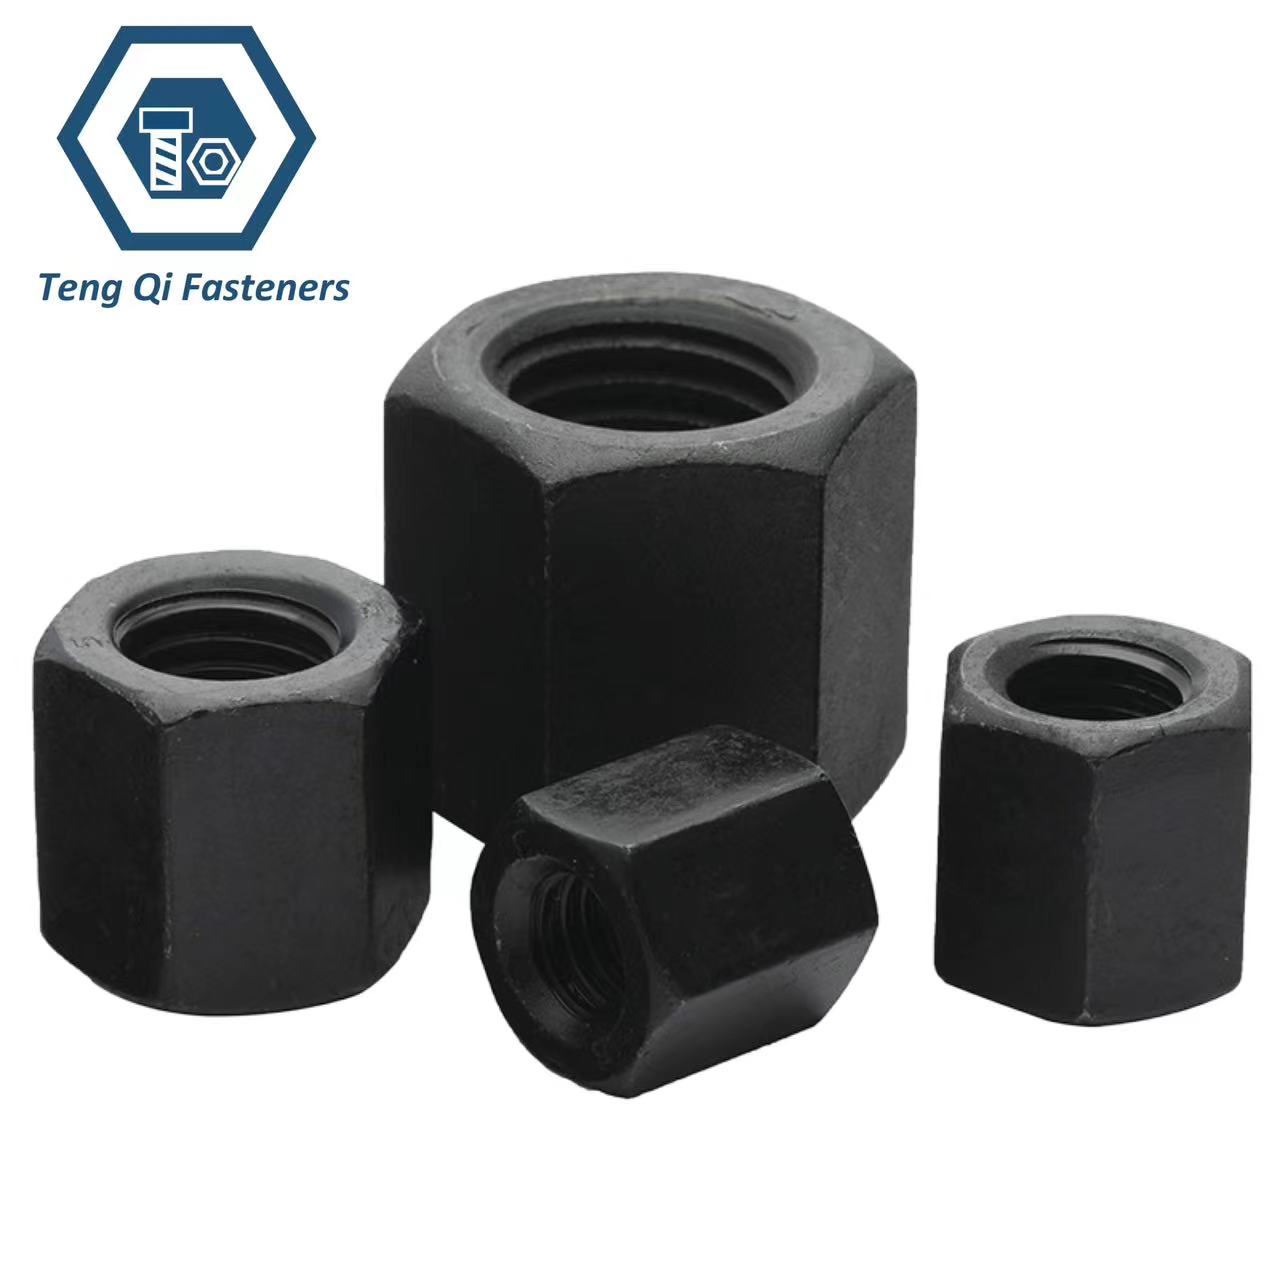 Class 10 High Strength Black DIN6330 Hex Thick Nuts